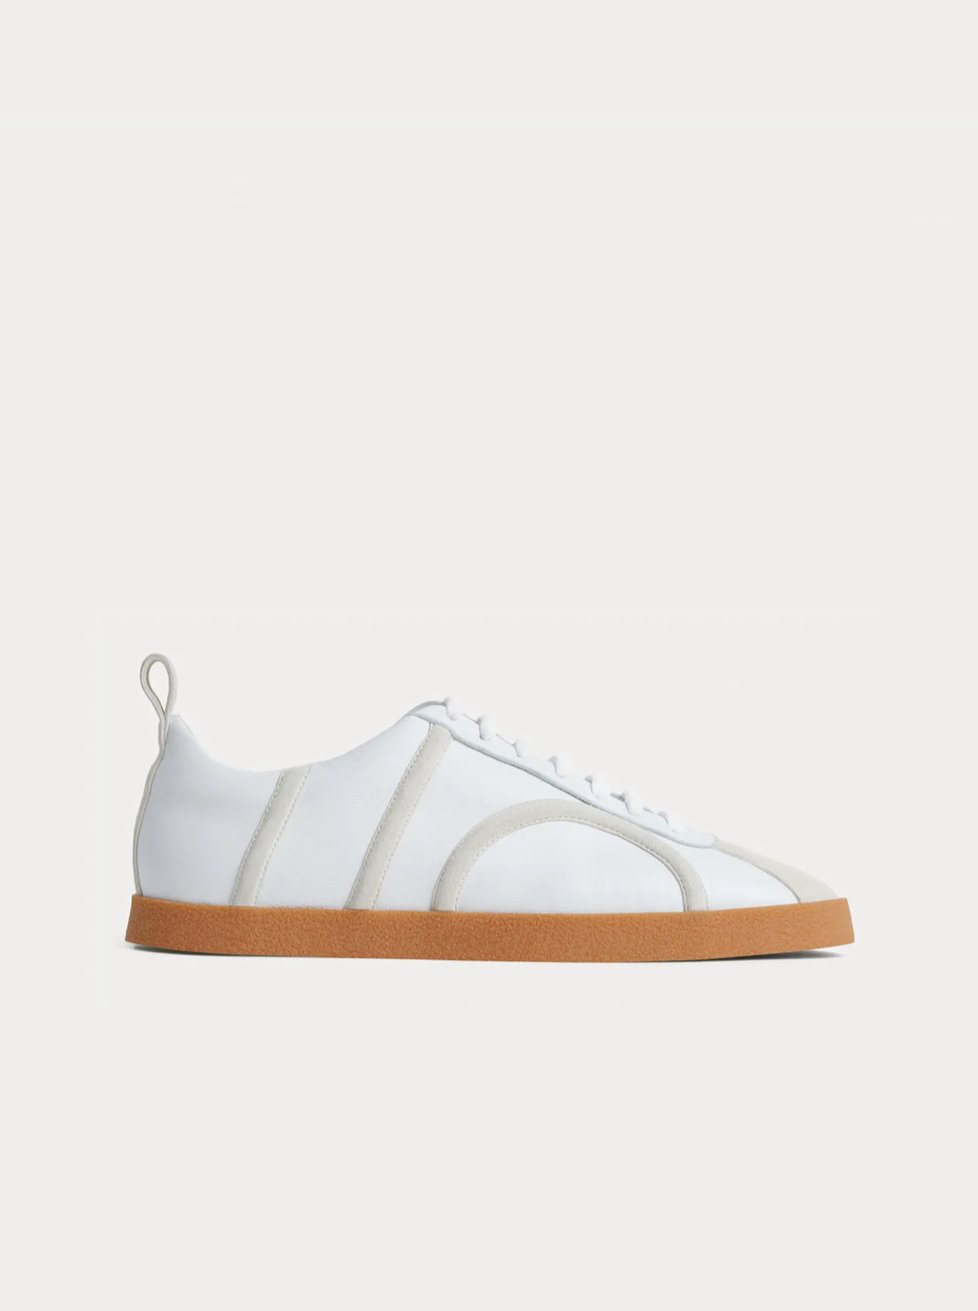 The Leather Sneaker off-white by Toteme - The Line